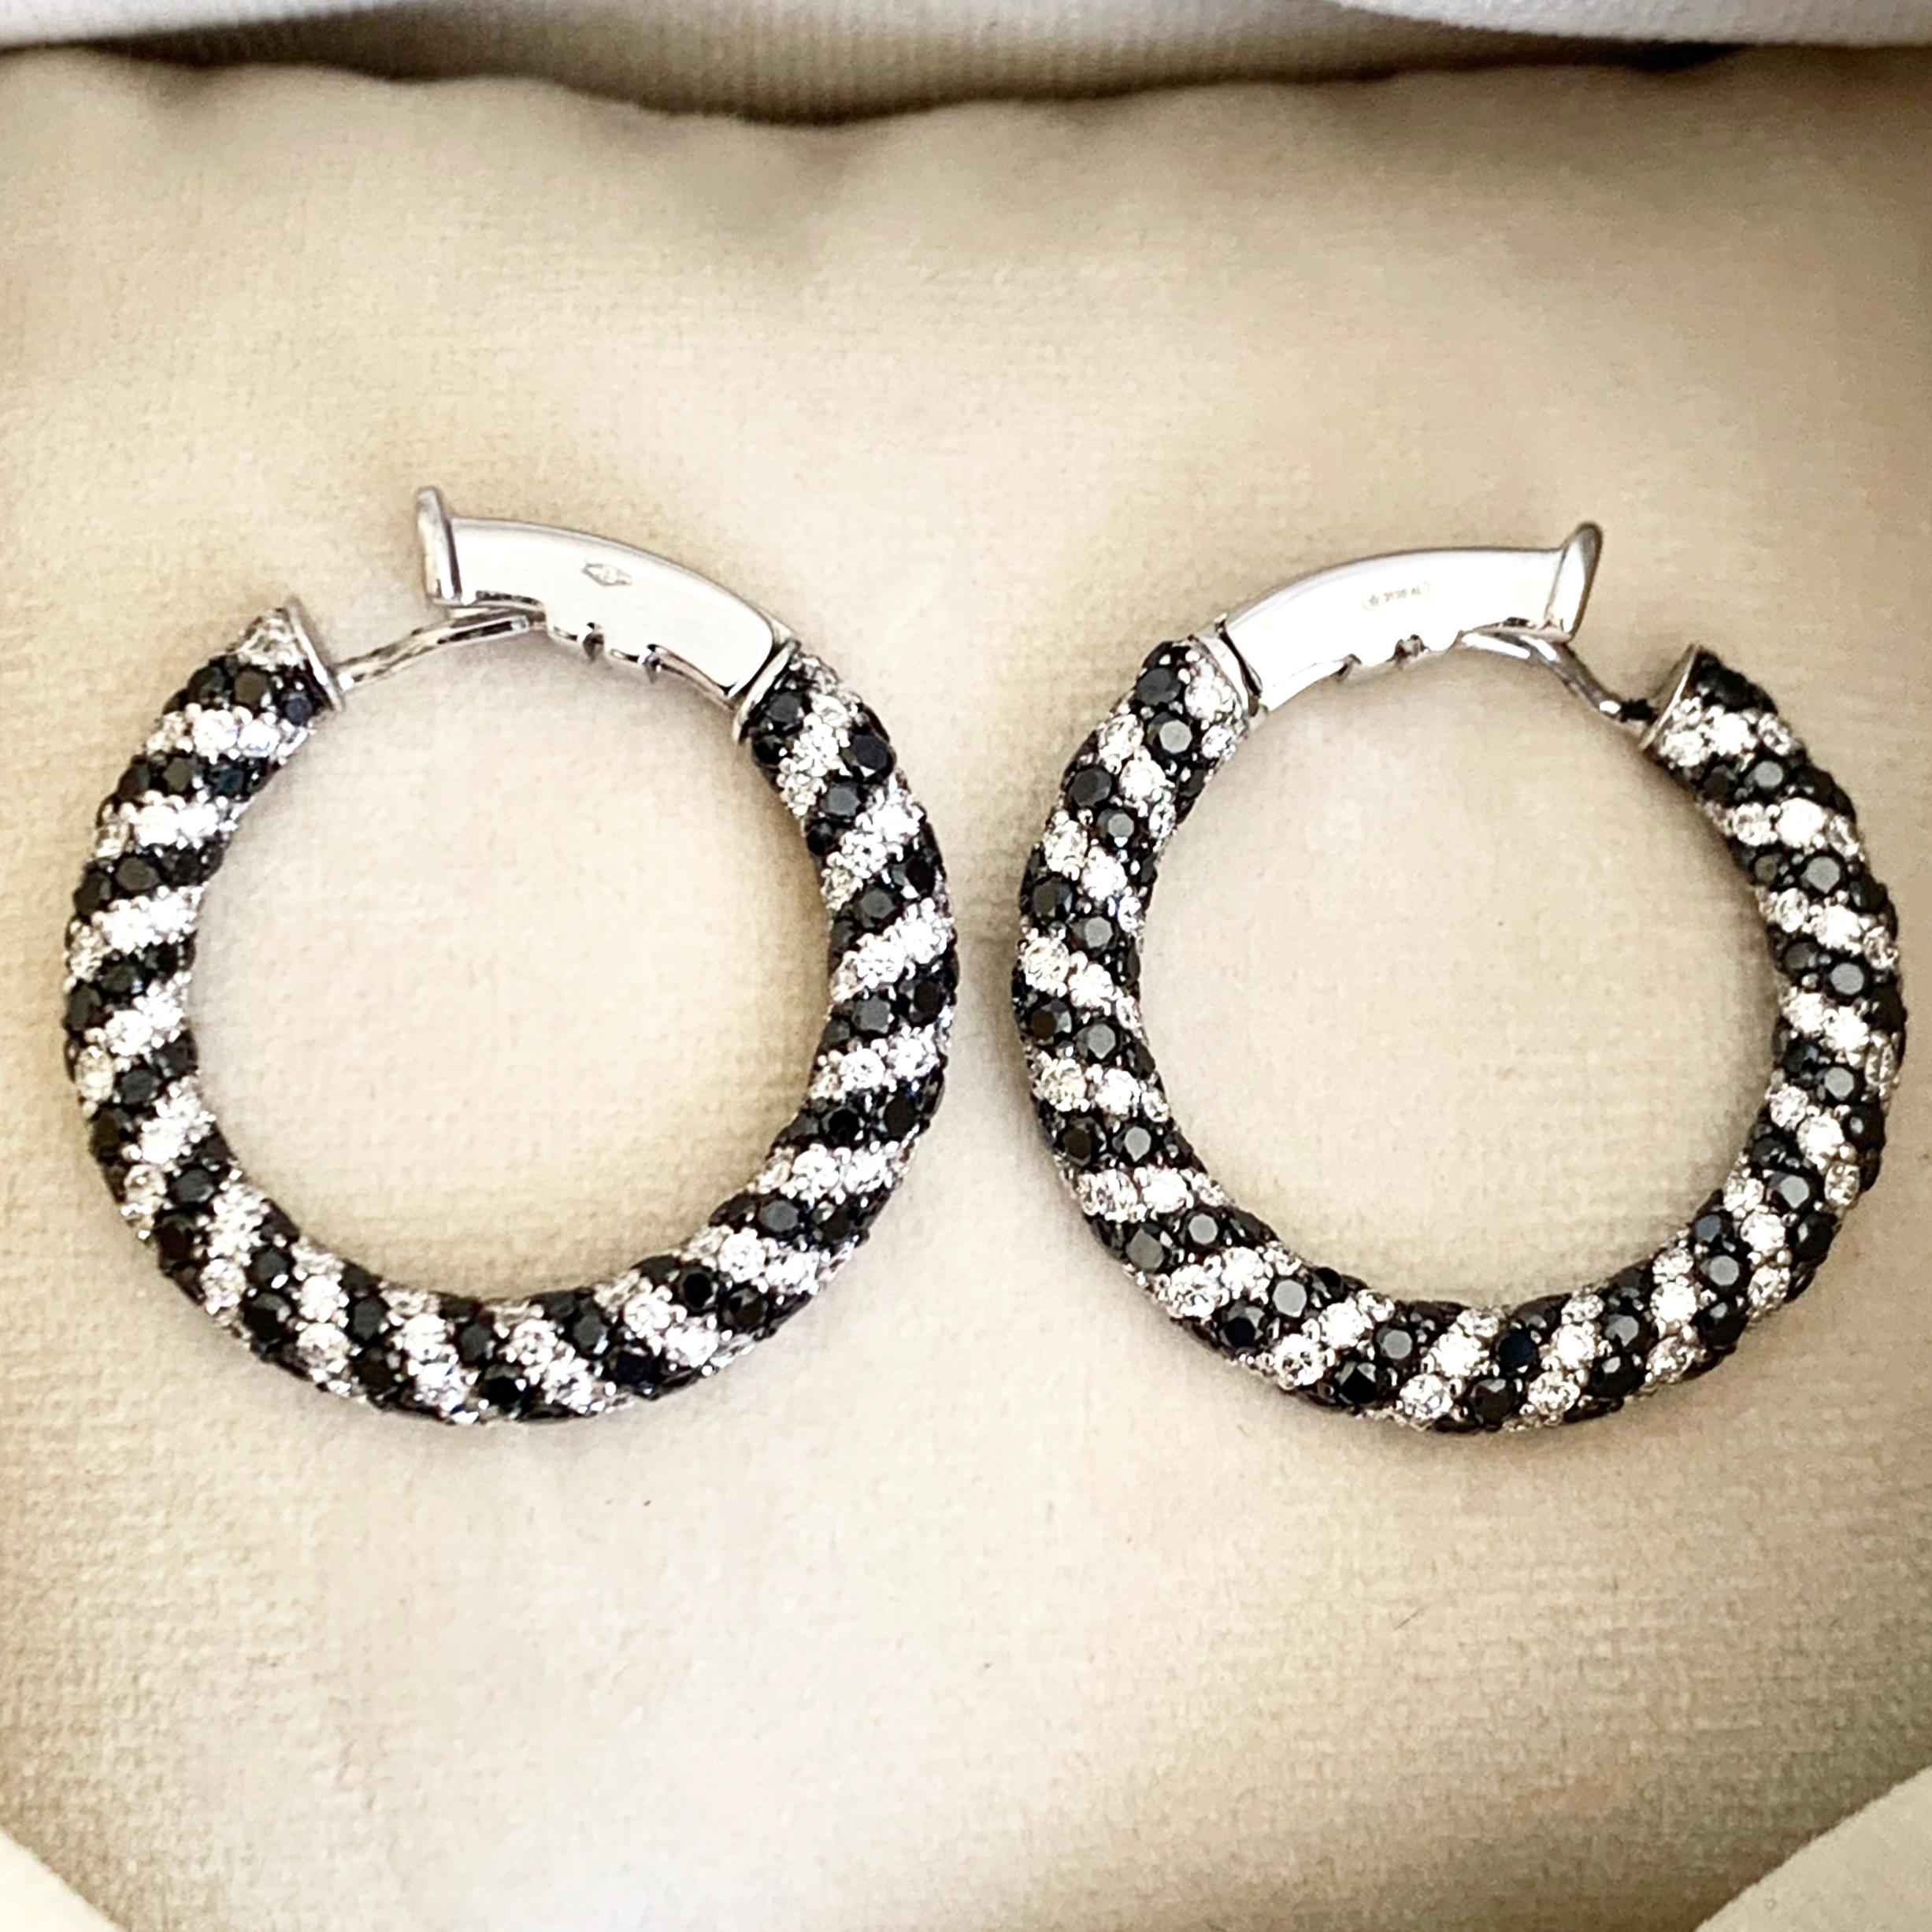 Contemporary 18 Karat White Gold 7.24 Carat Black and White Diamond Spiral Pave Hoop Earrings